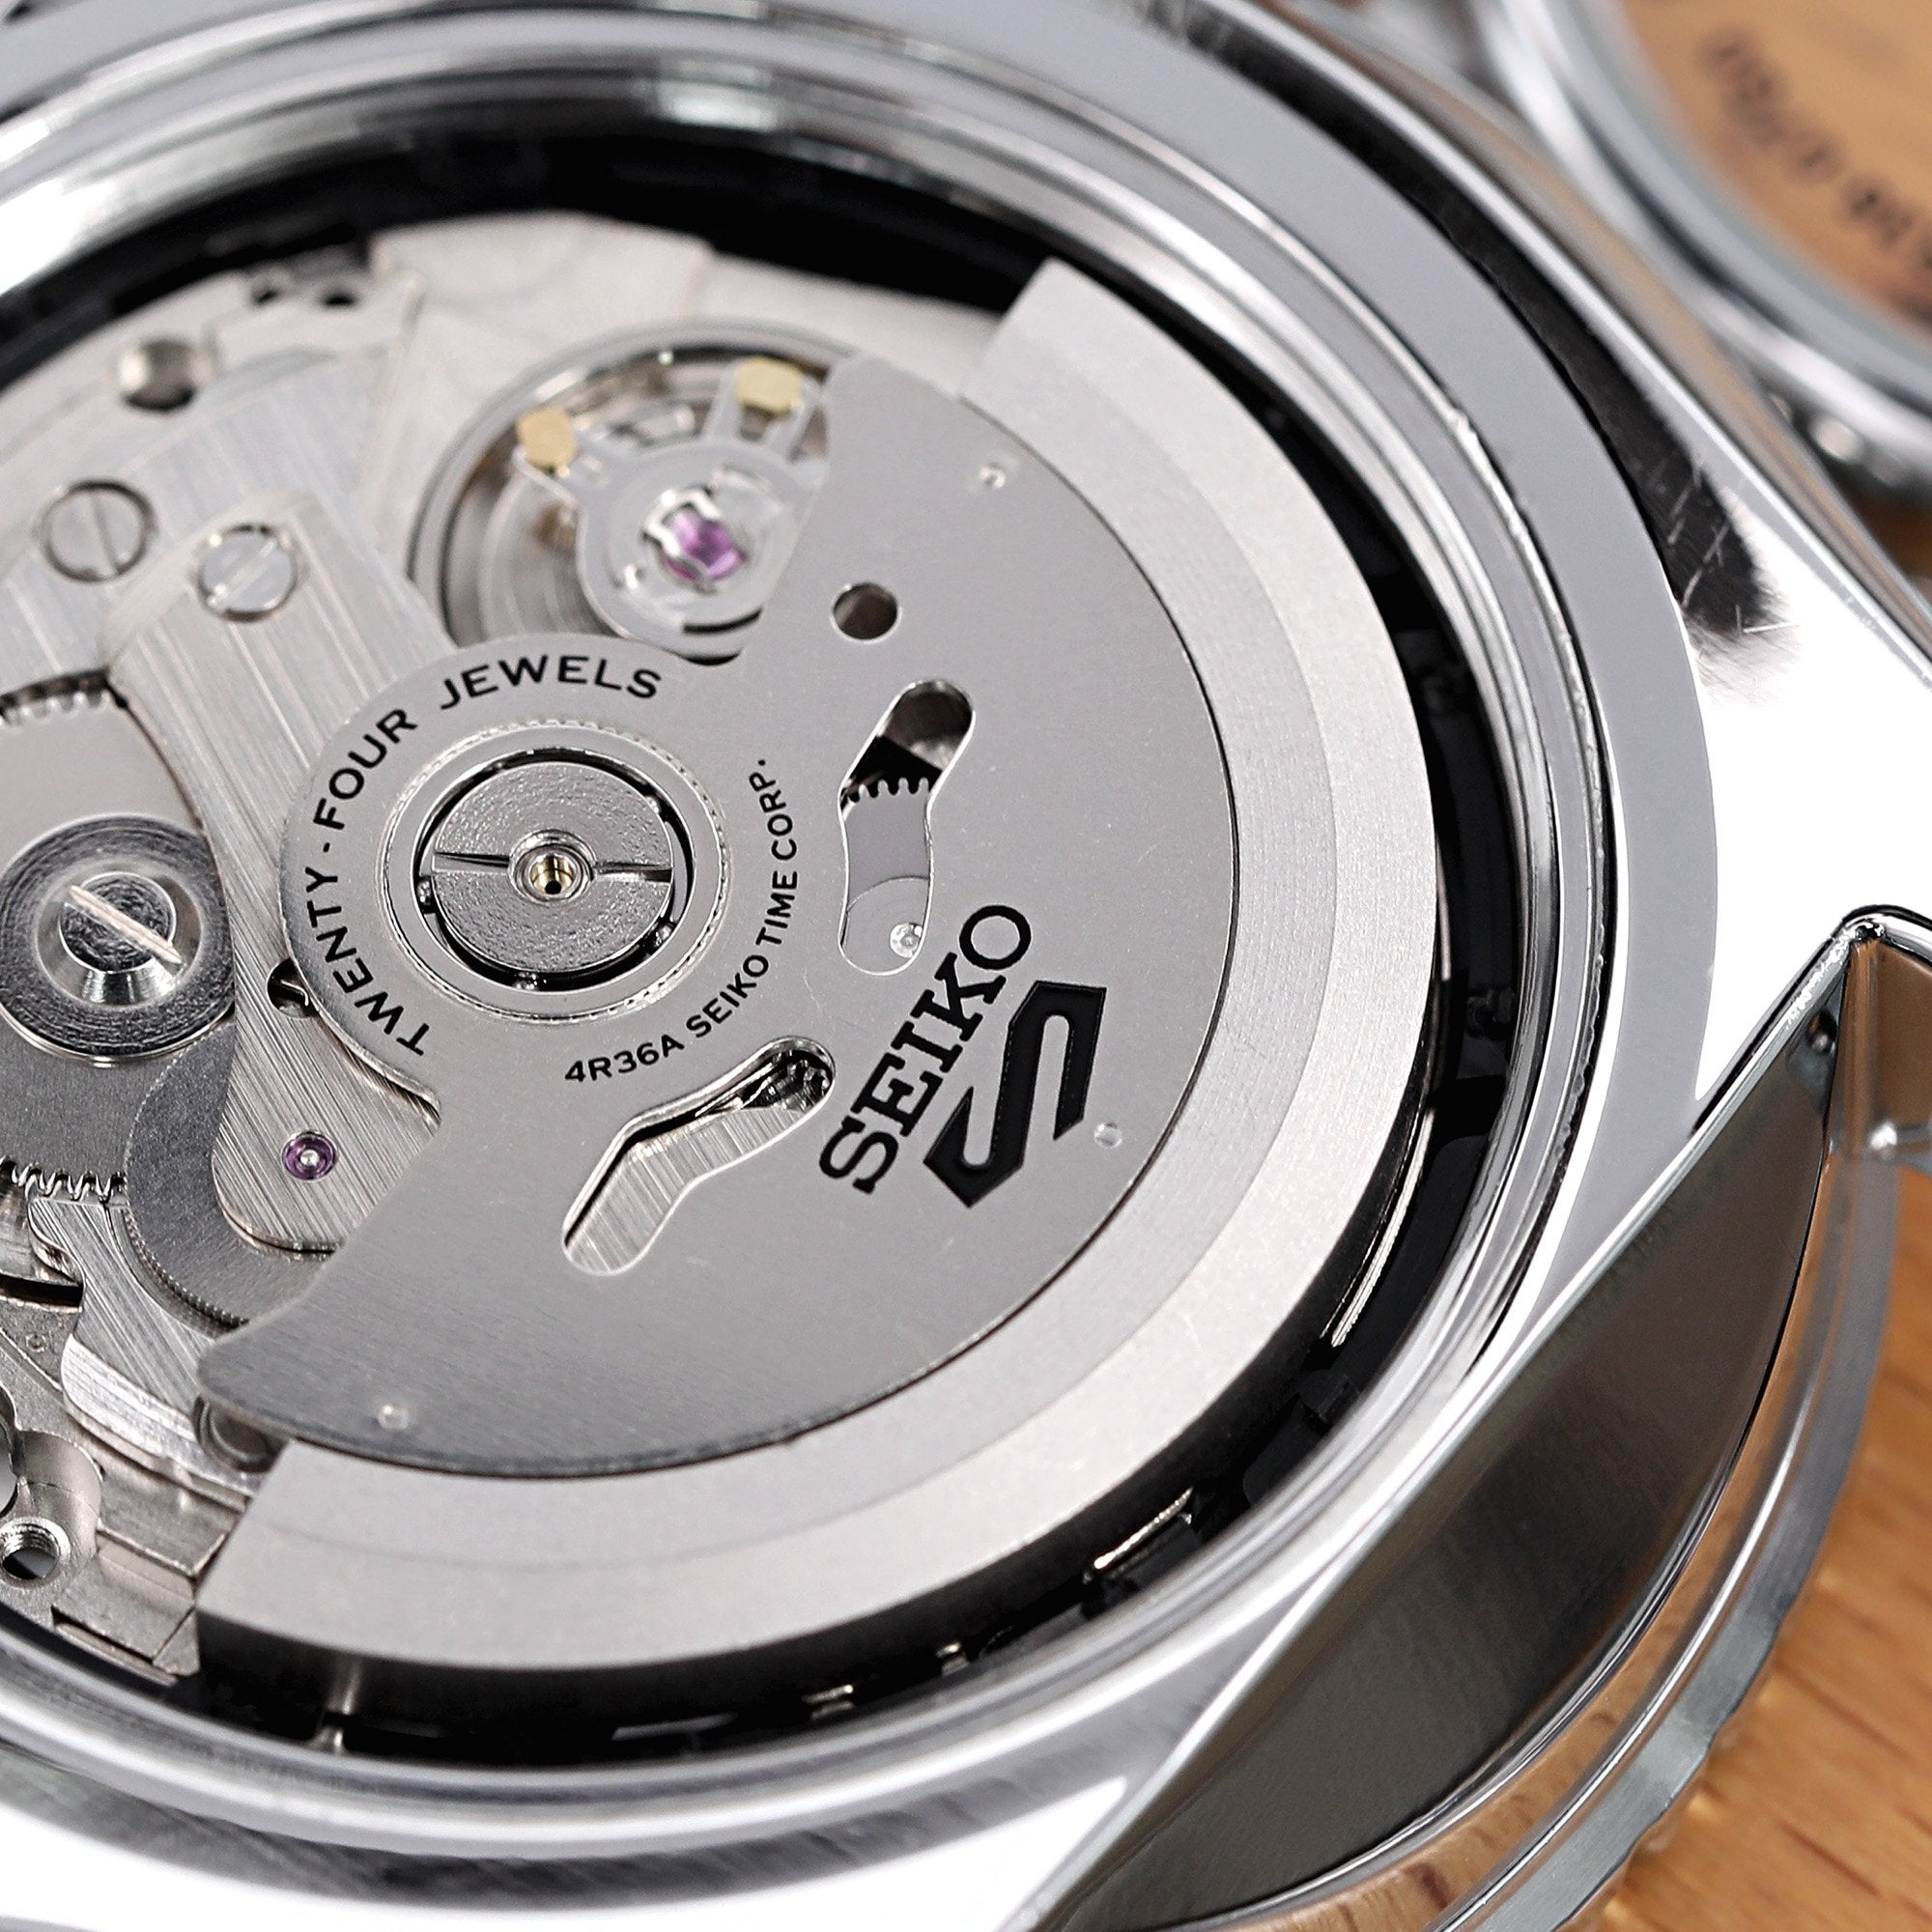 Total 56+ imagen is the seiko 4r36 a good movement